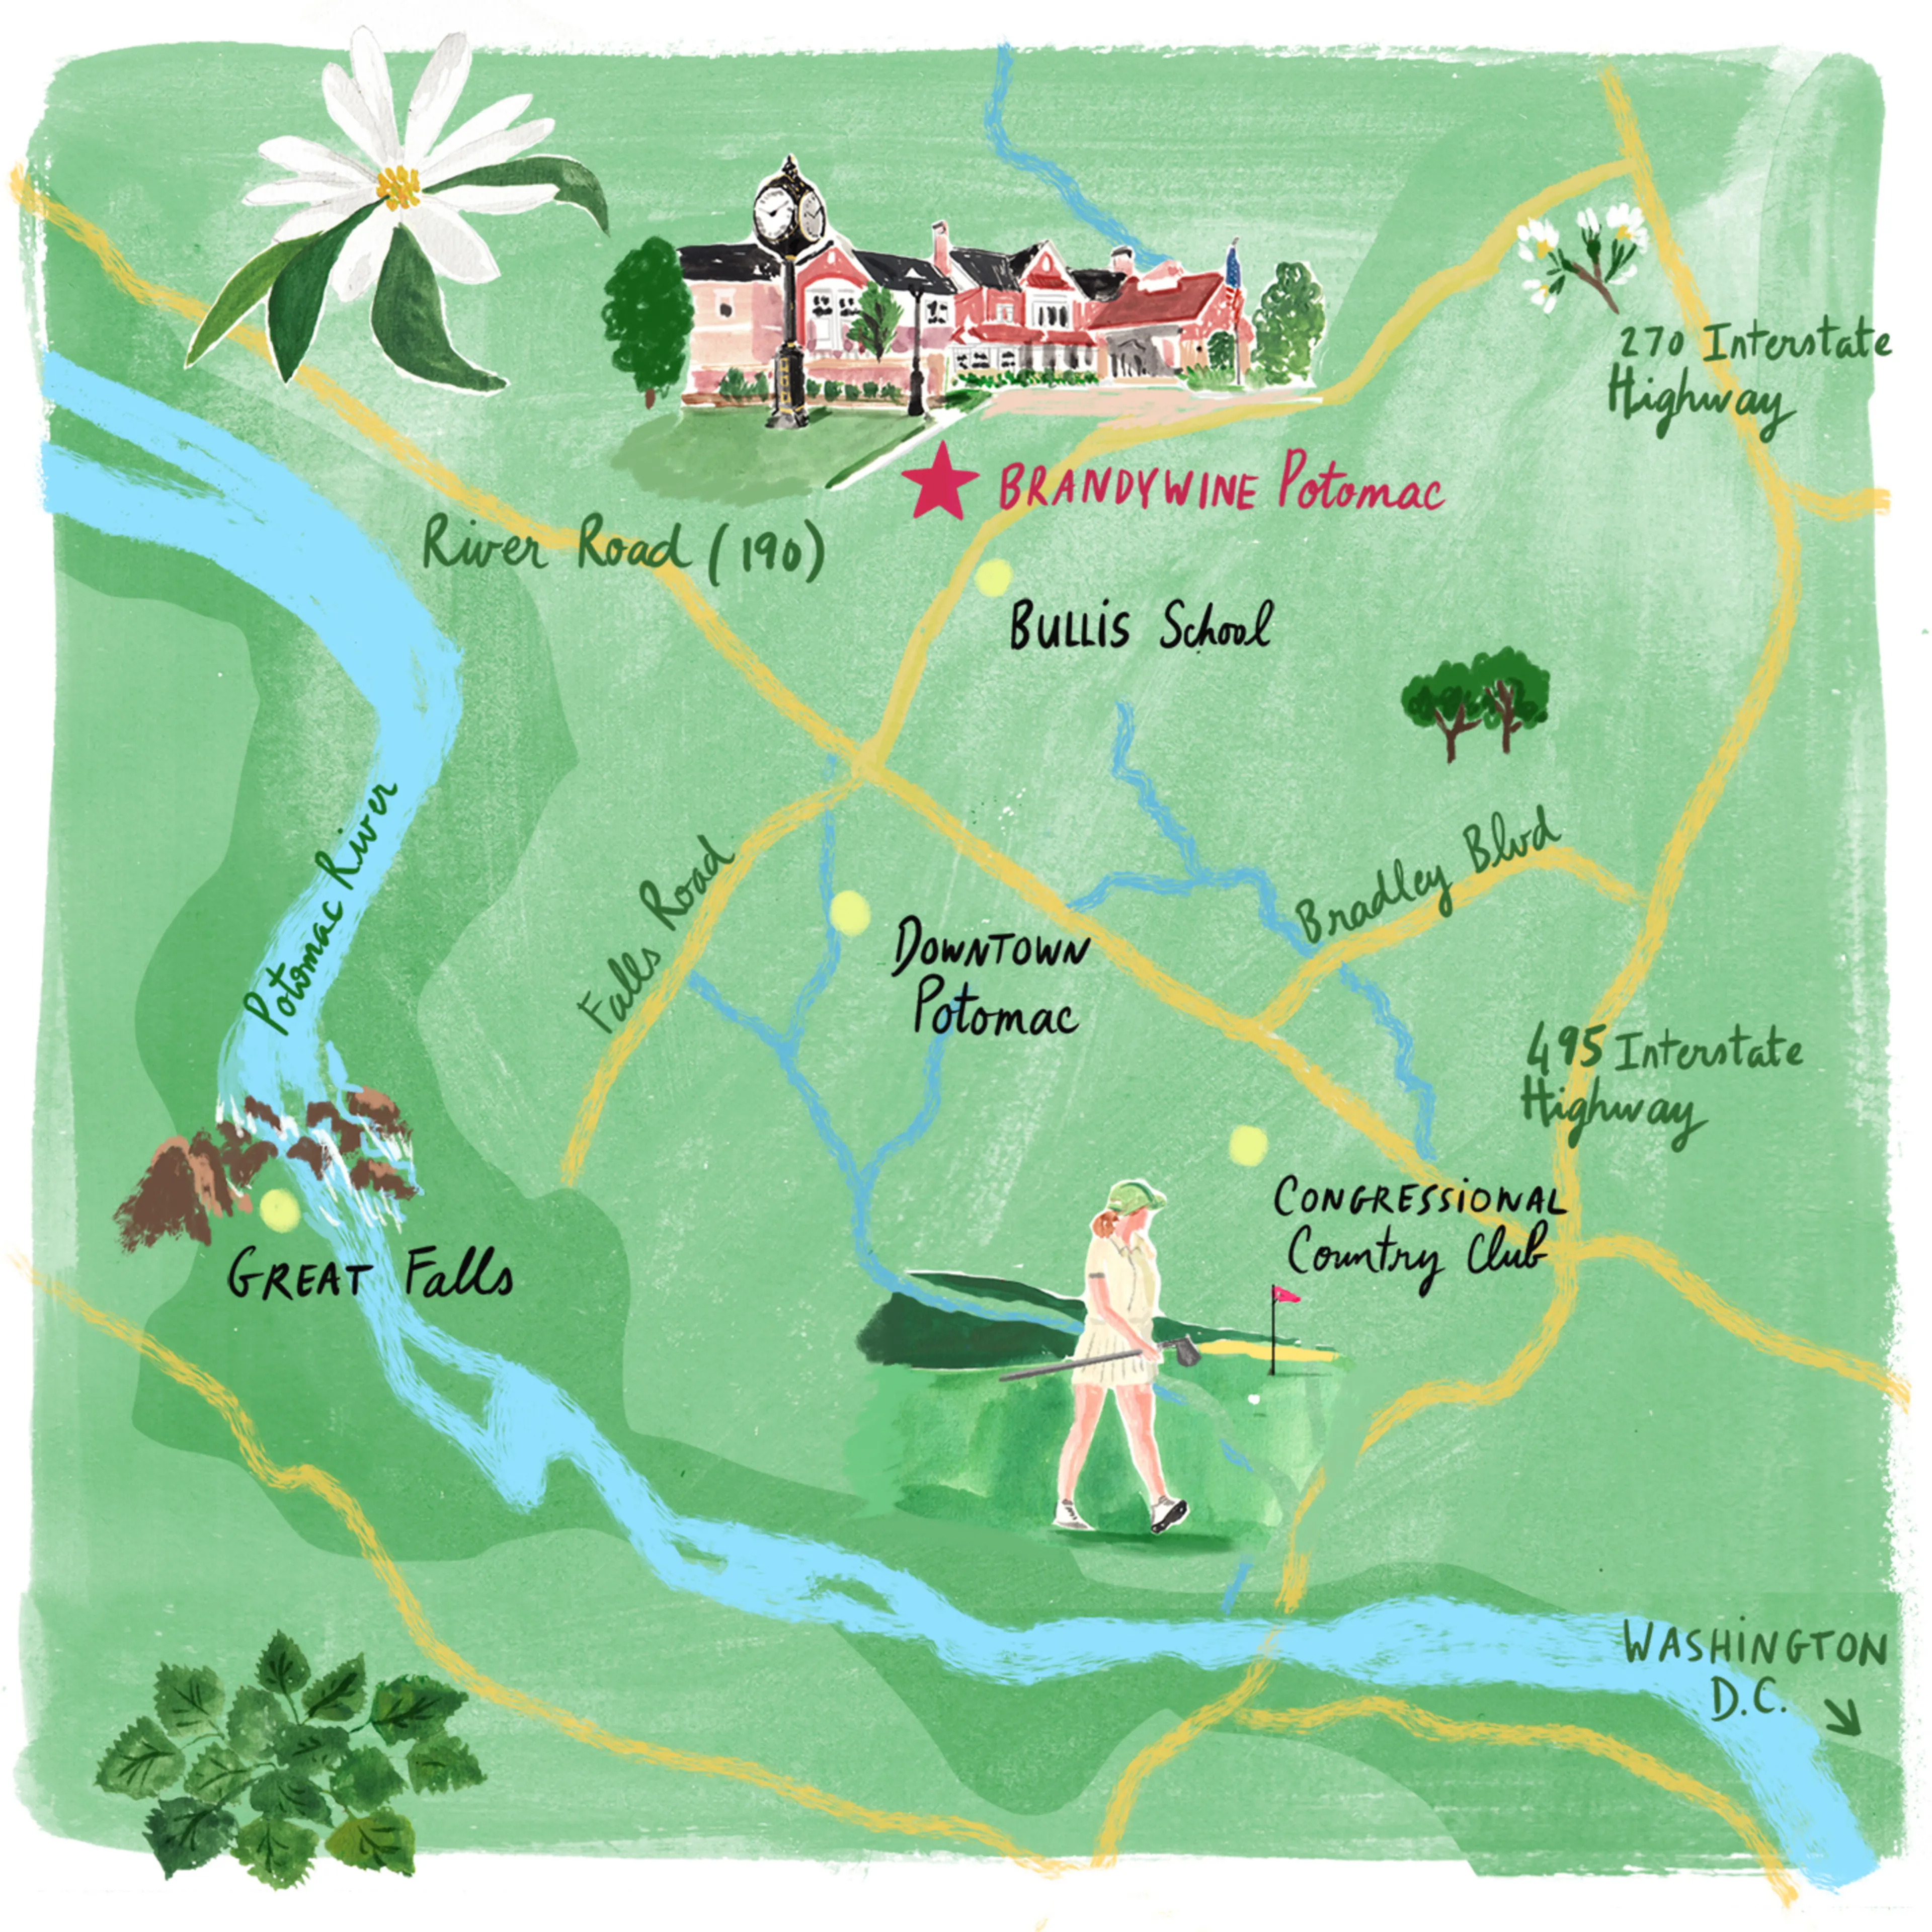 Hand-illustrated map of major roads and landmarks surrounding Brandyine Potomac in Potomac, MD